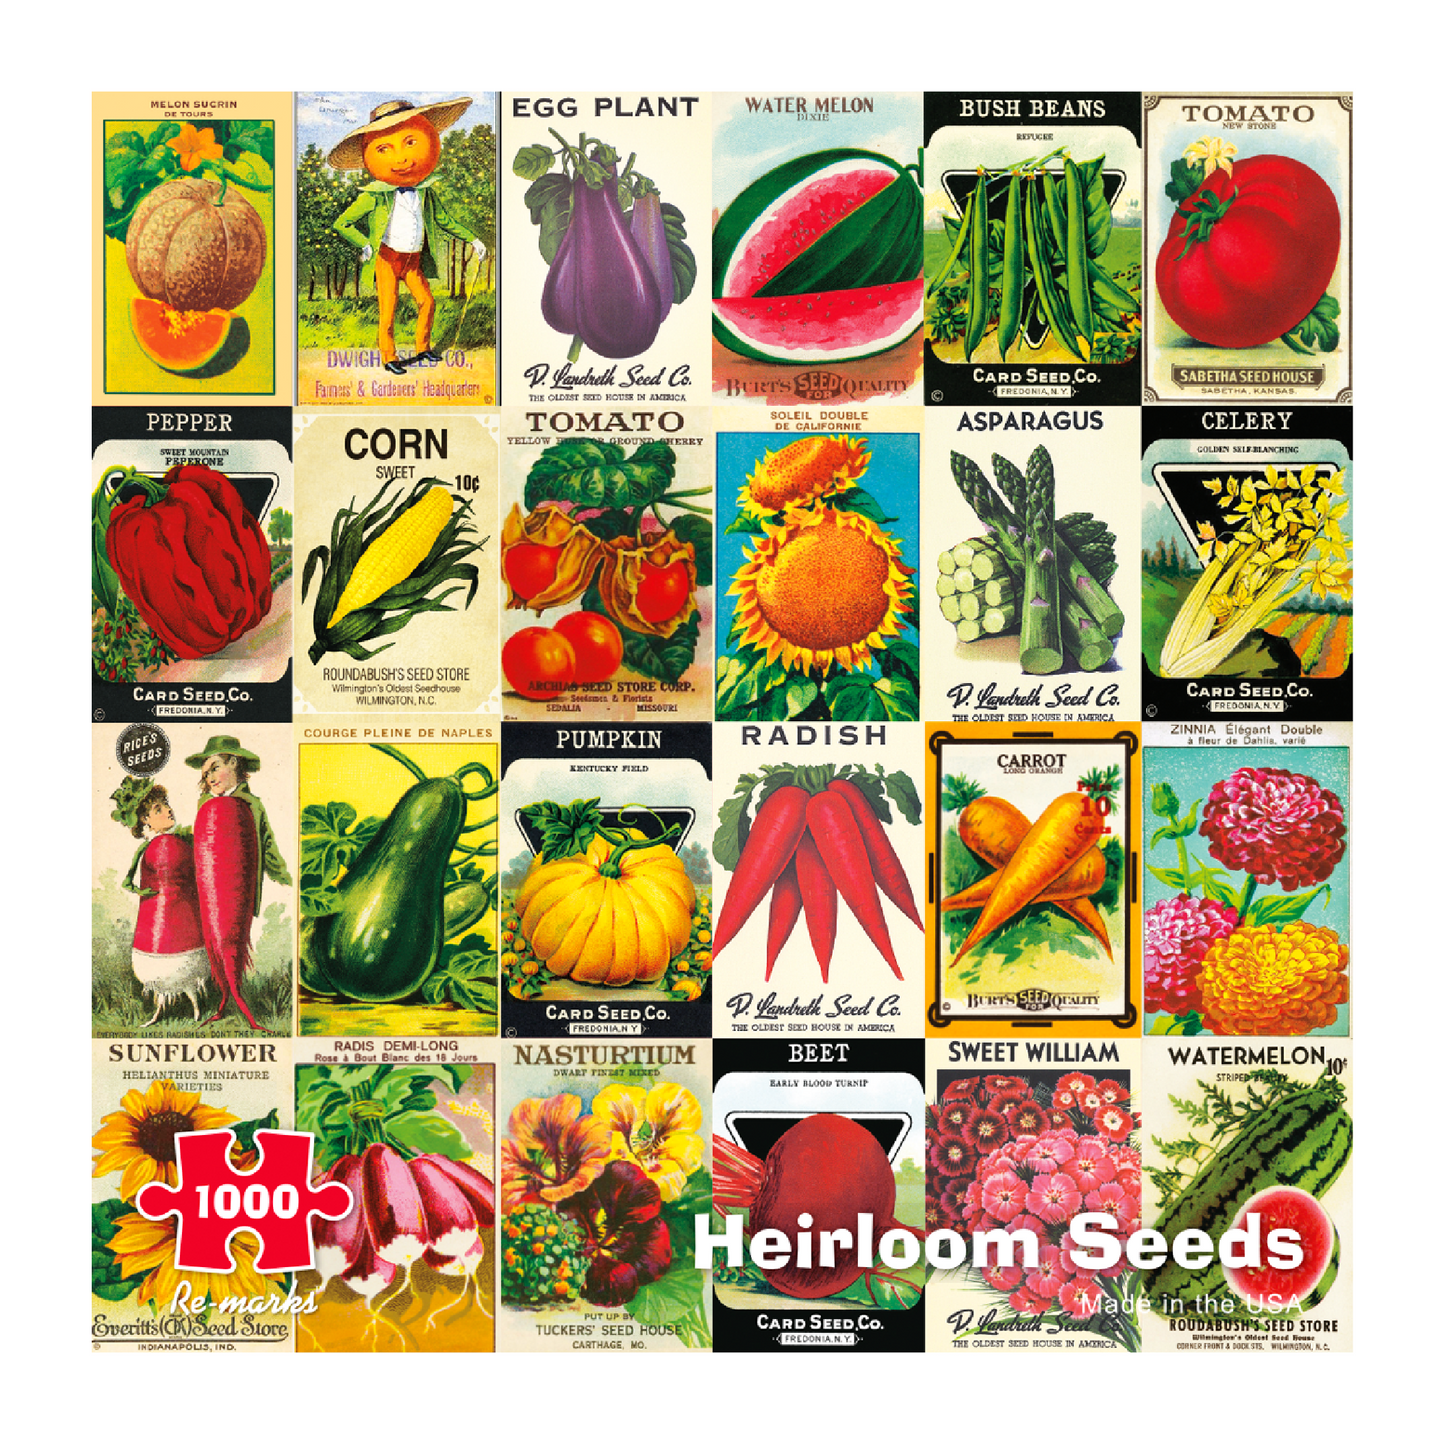 Heirloom Seeds Collage 1000-Piece Jigsaw Puzzle